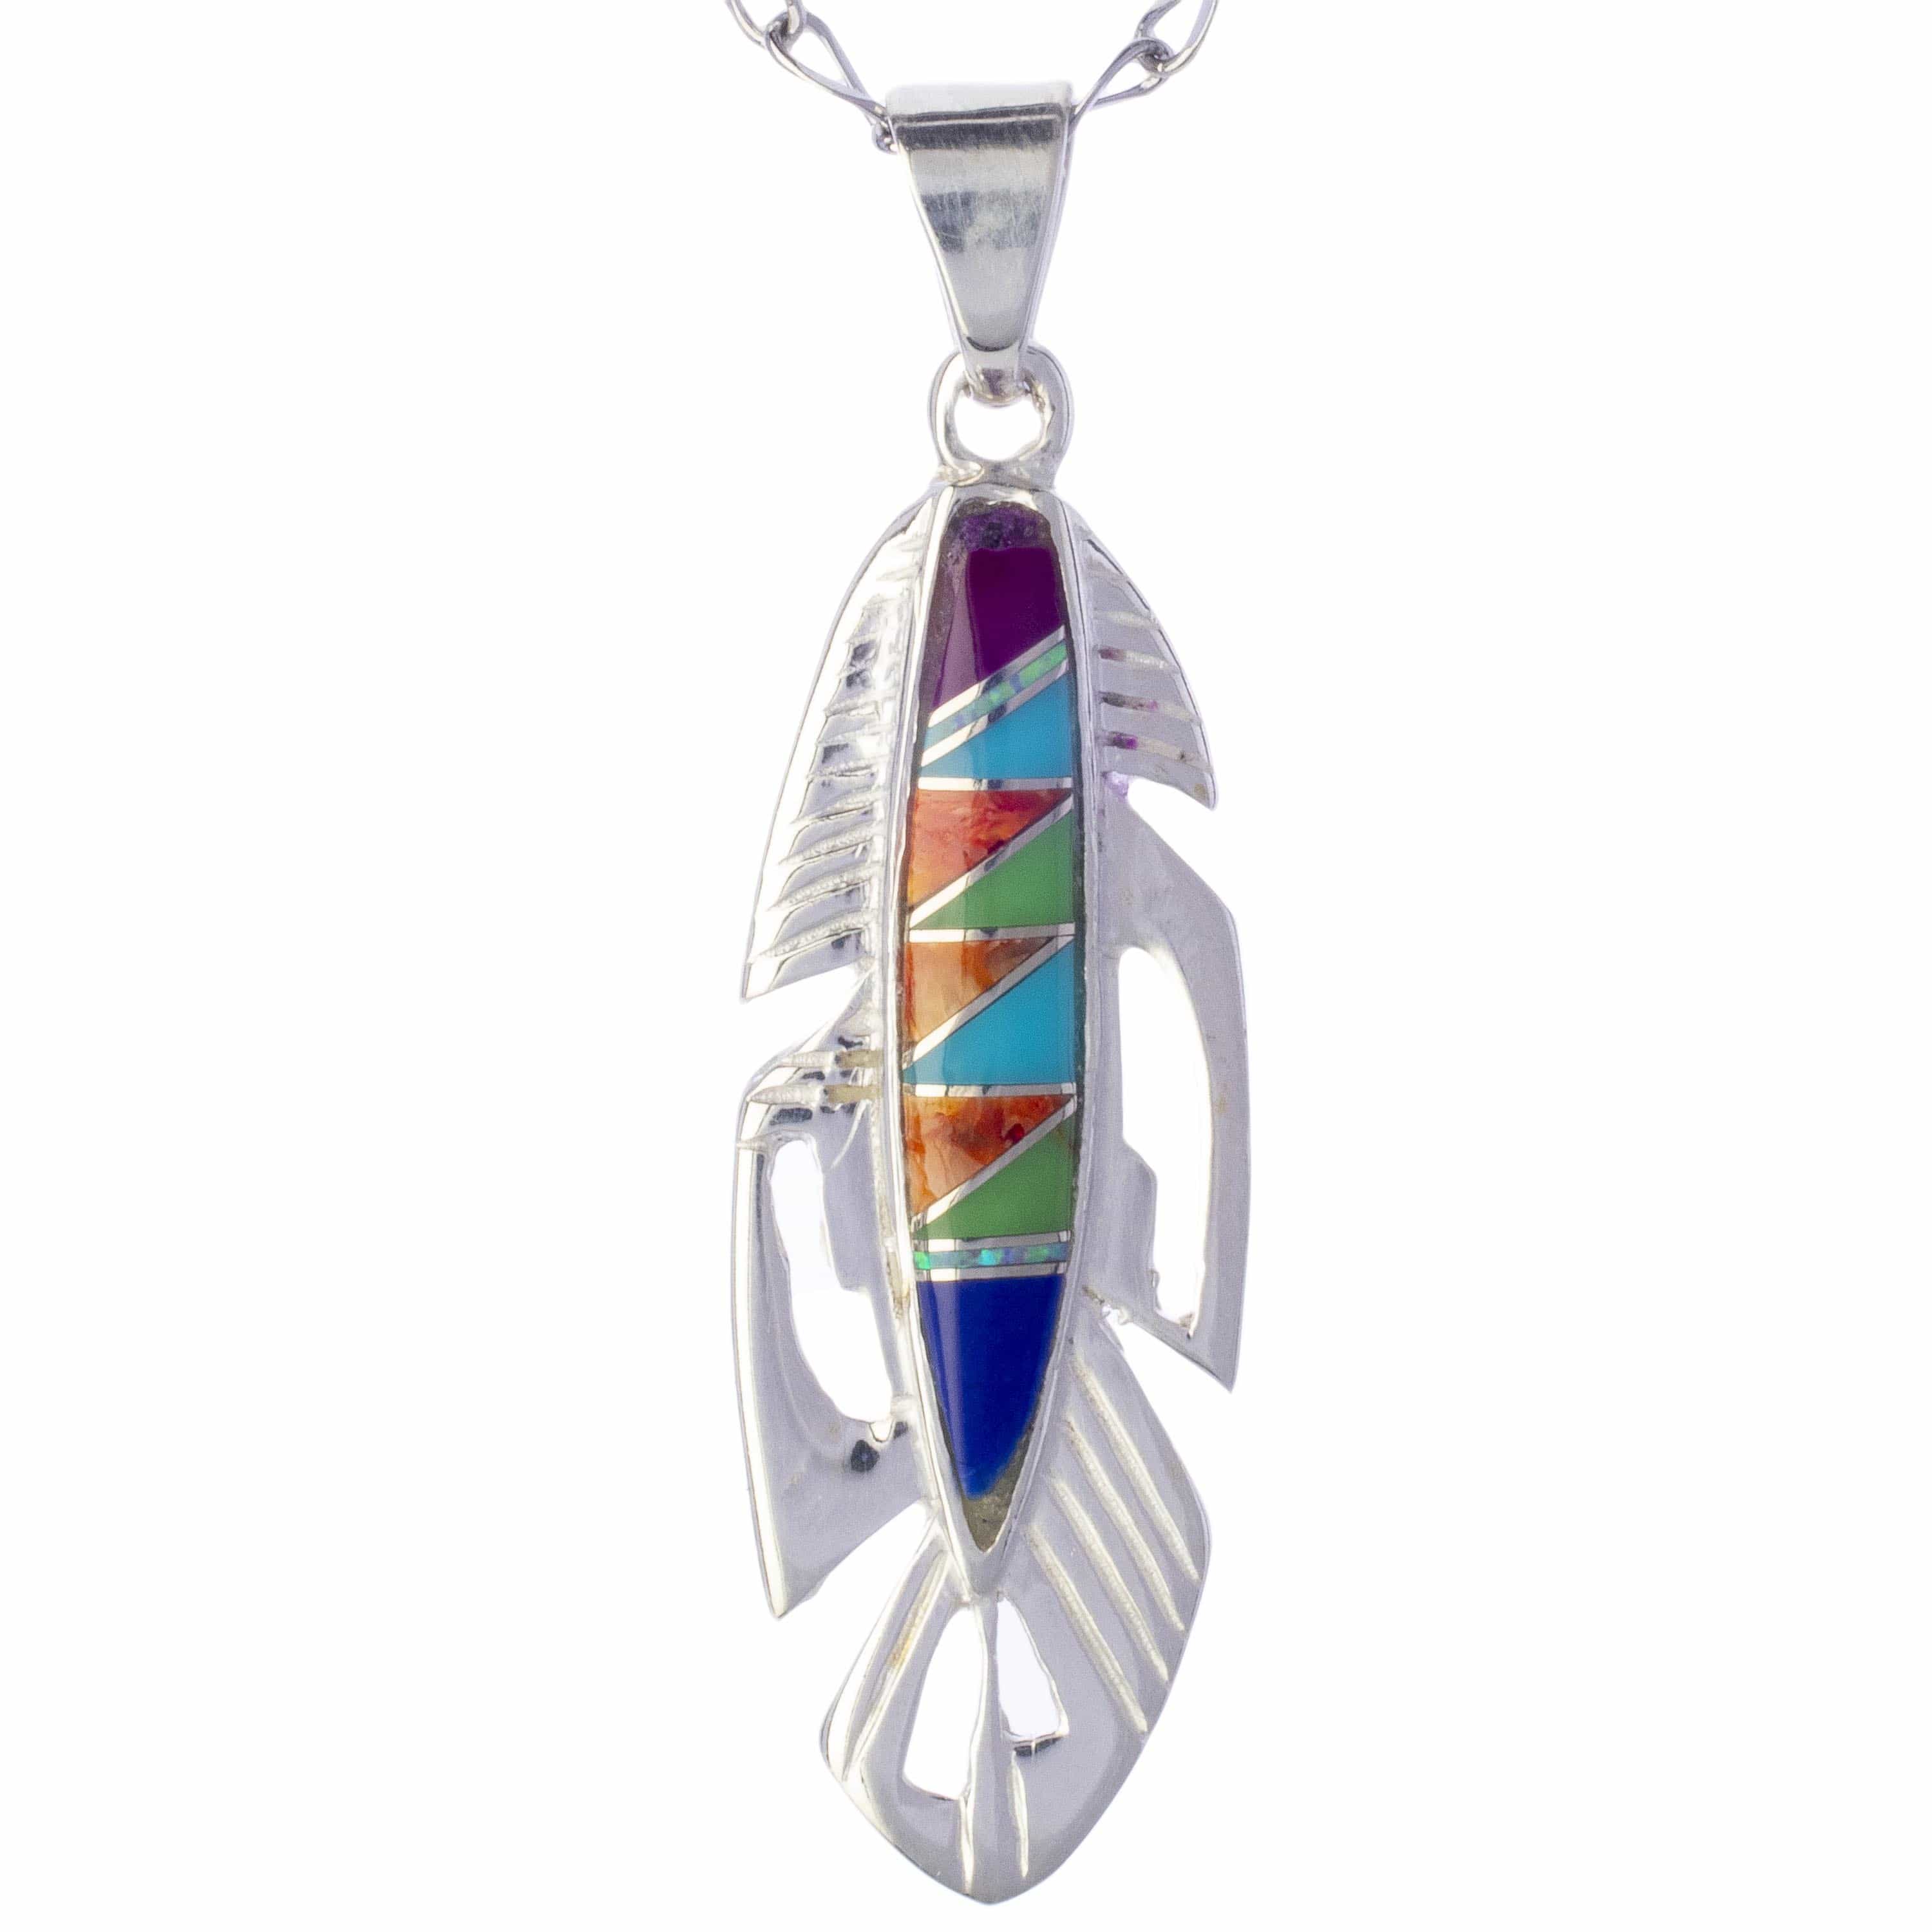 Kalifano Southwest Silver Jewelry Multi Gemstone Feather 925 Sterling Silver Pendant USA Handmade with Opal Accent NMN.2113.MT